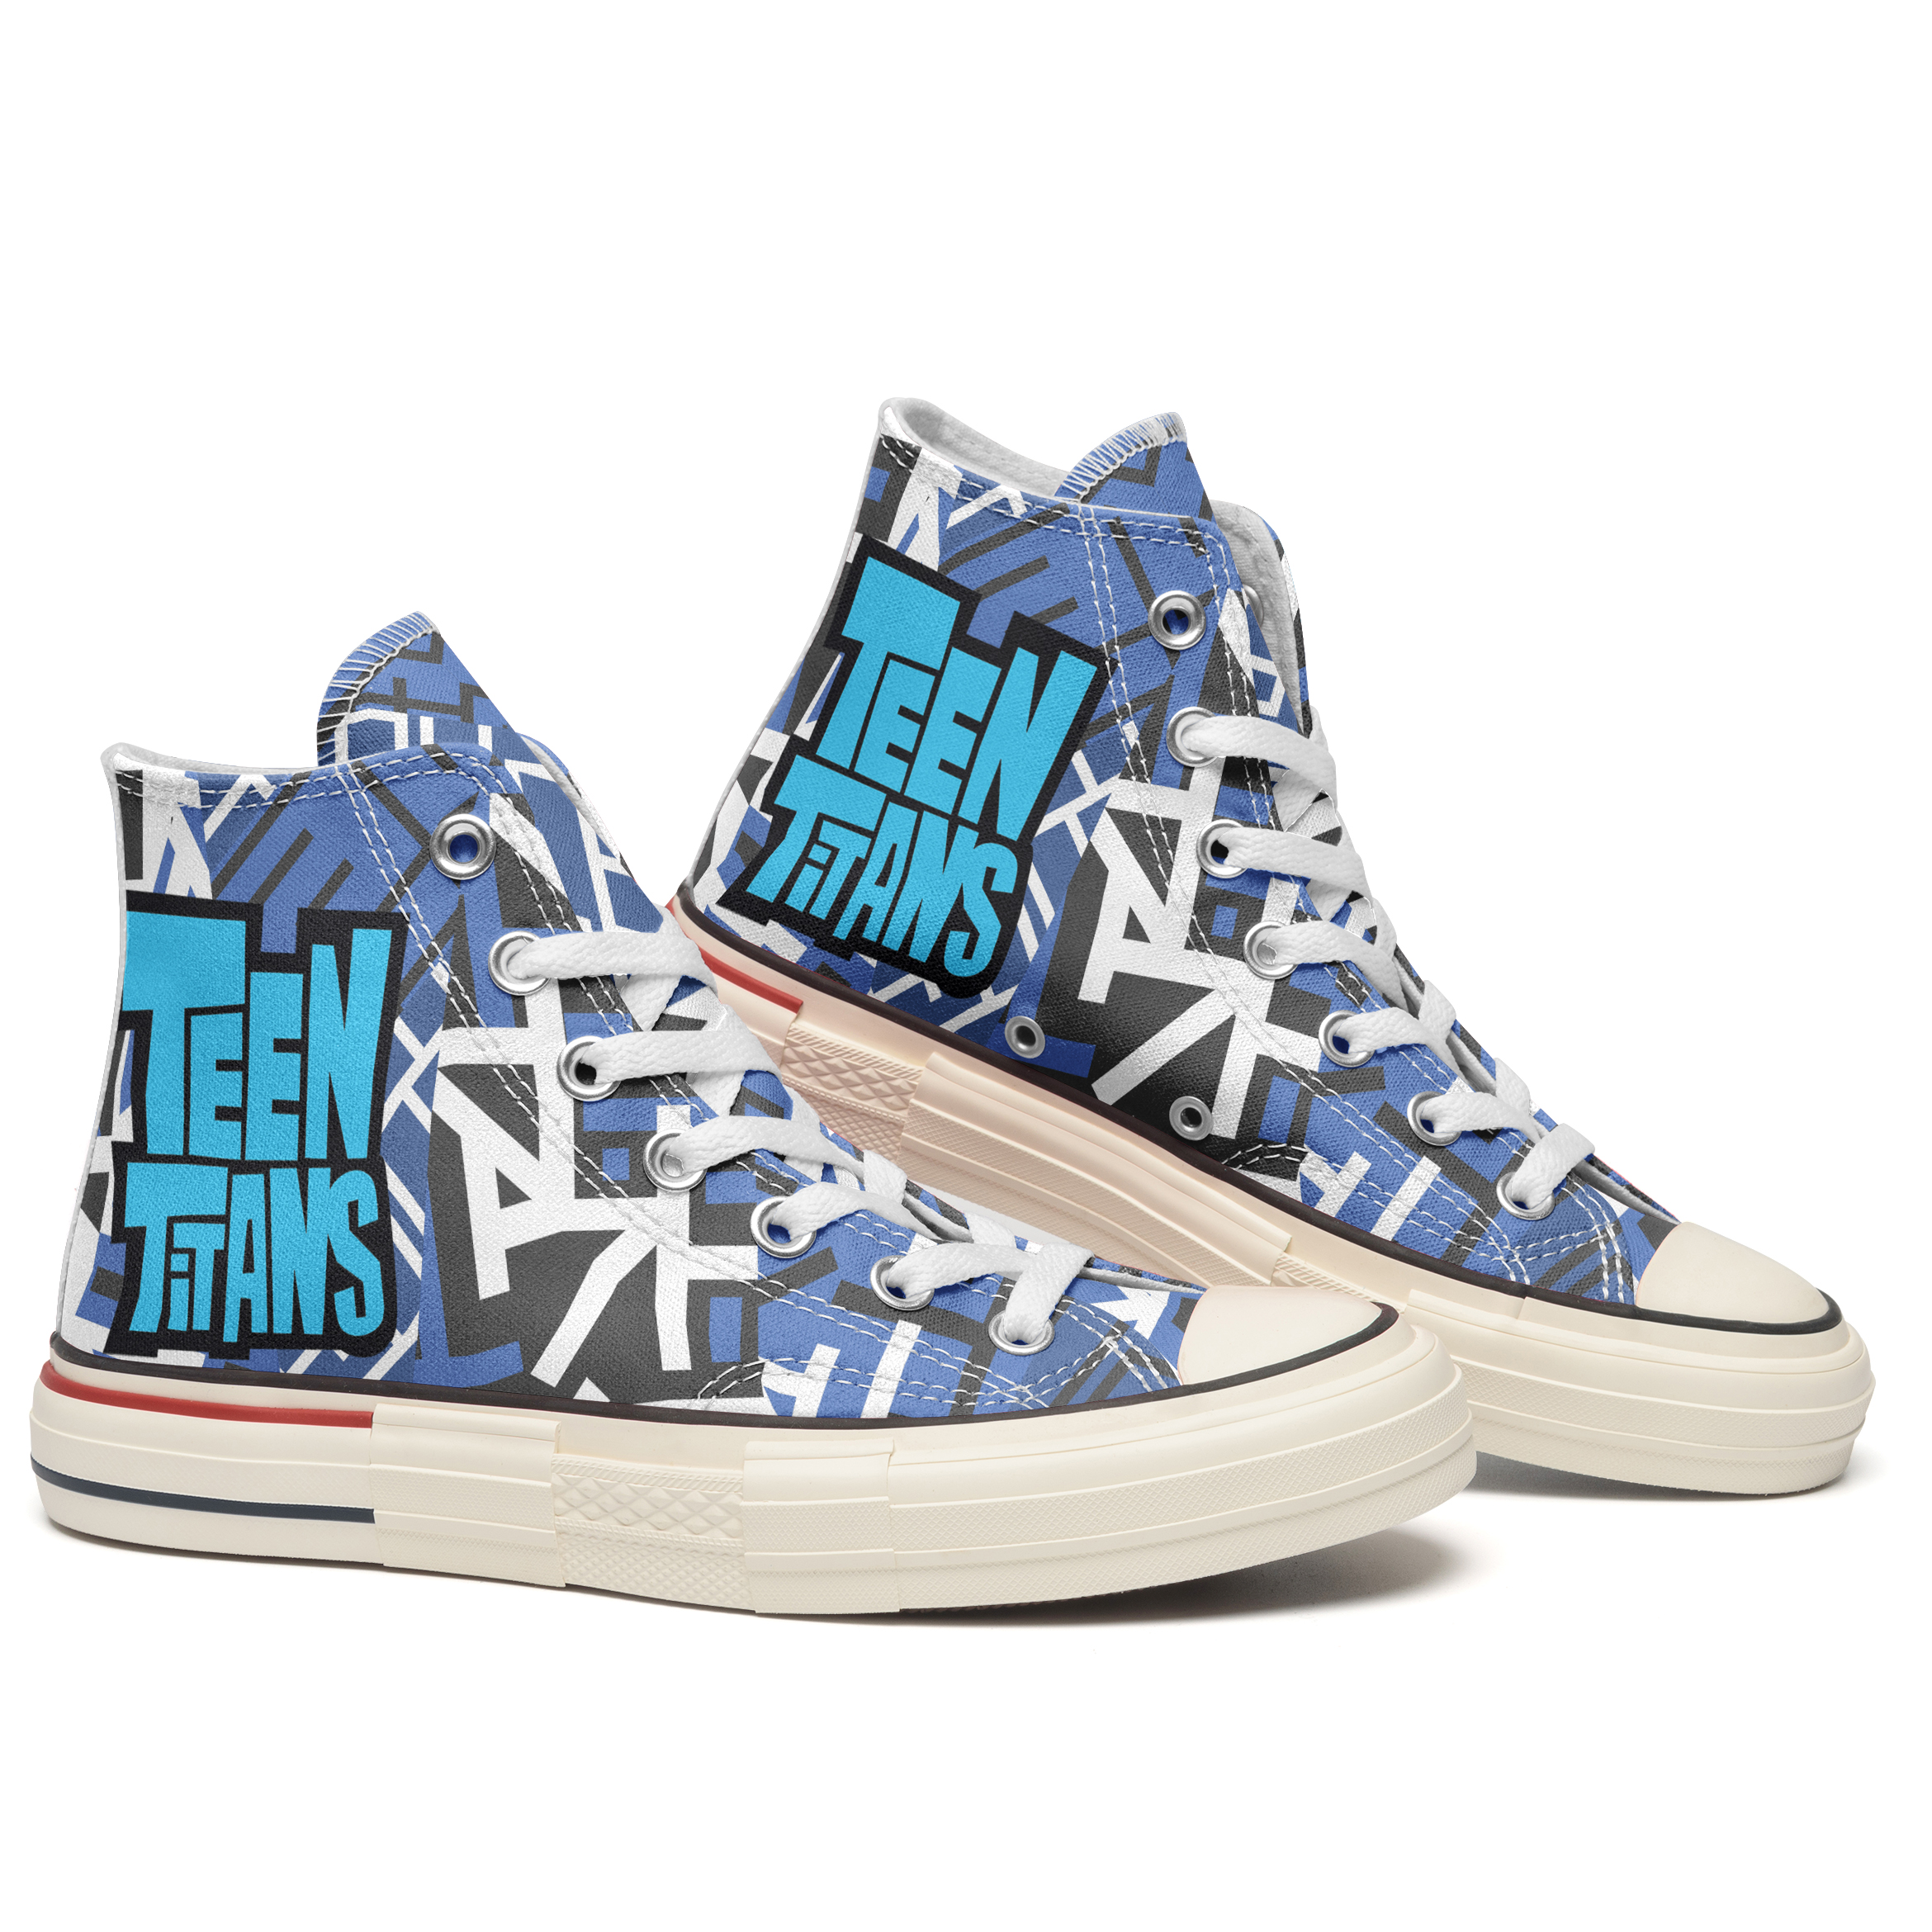 Teen Titans High Top Canvas Shoes Special Edition